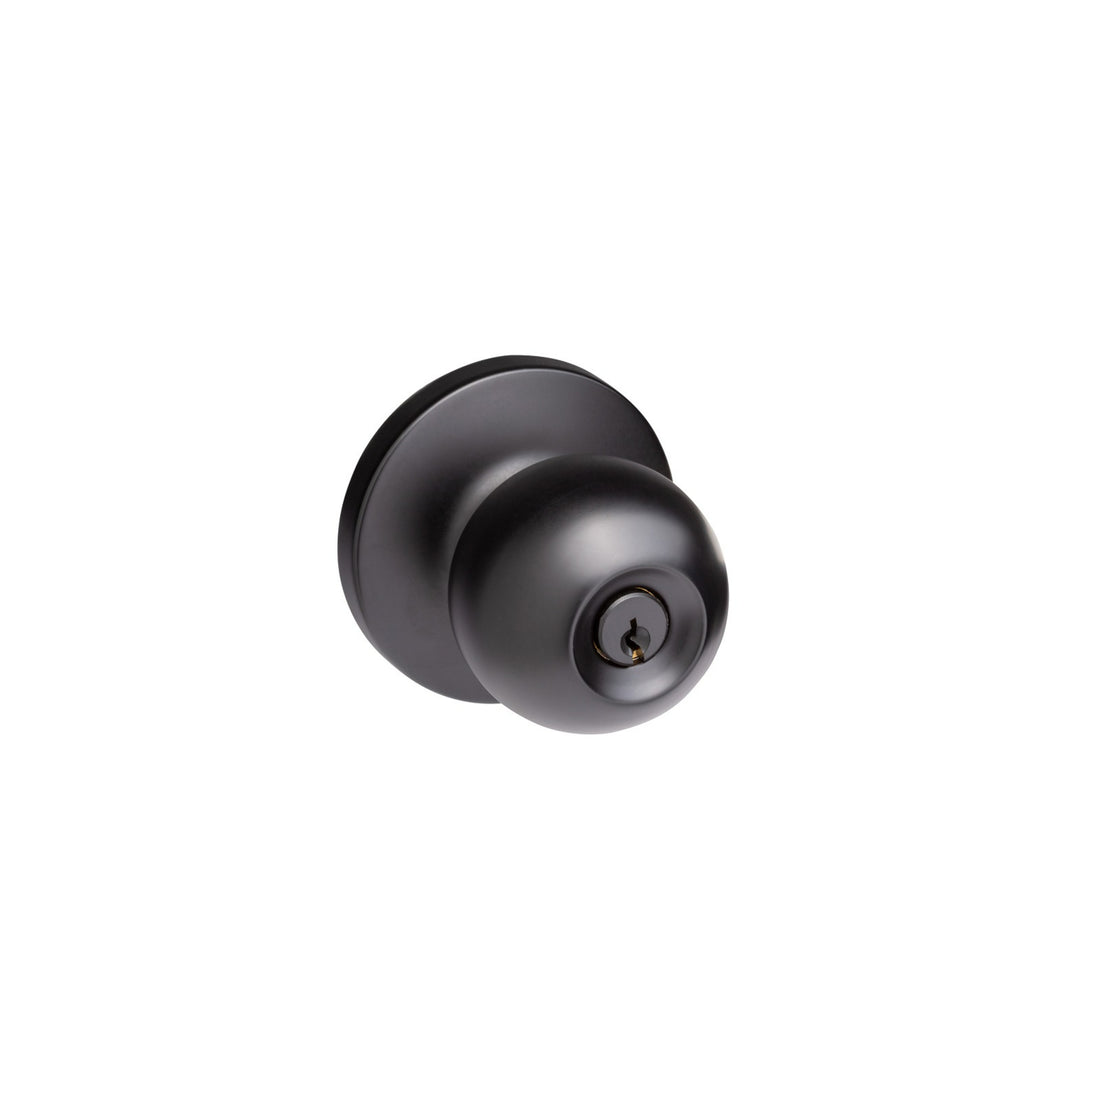 Oil Rubbed Bronze Commercial Storeroom Ball Knob Trim with Lock for Panic Exit Device -  Pro-Edge HD